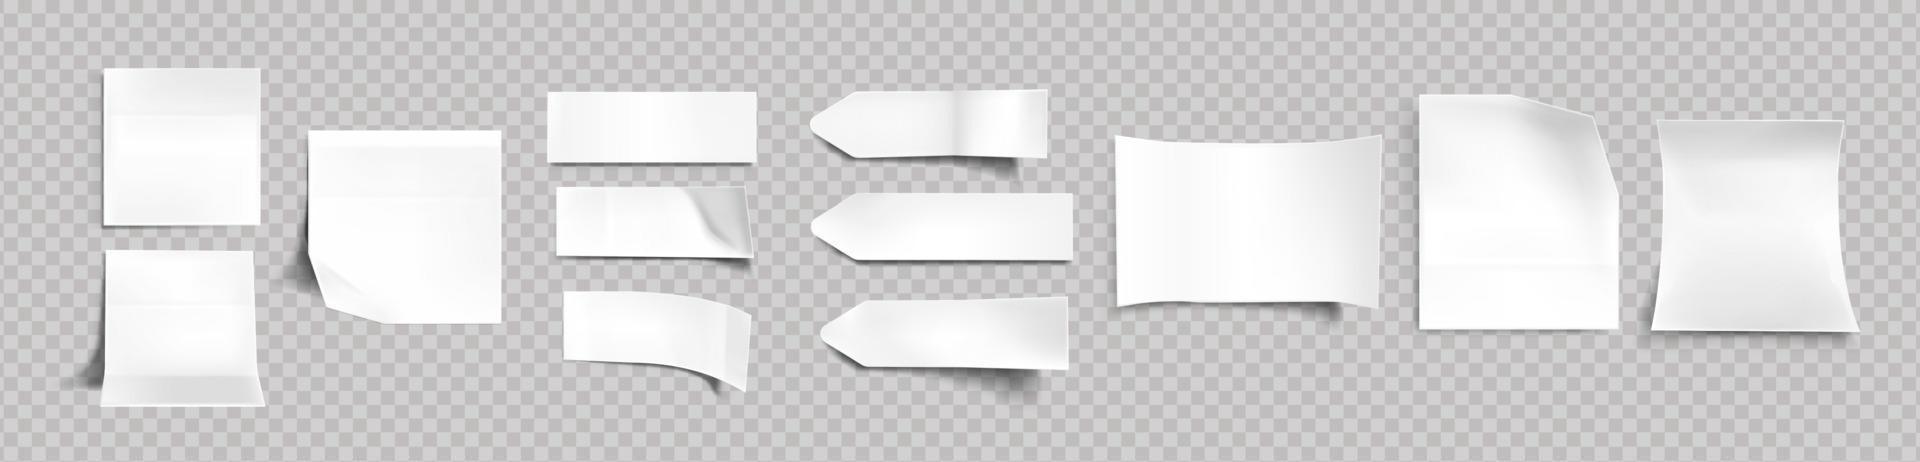 White stickers of different shapes with shadow vector